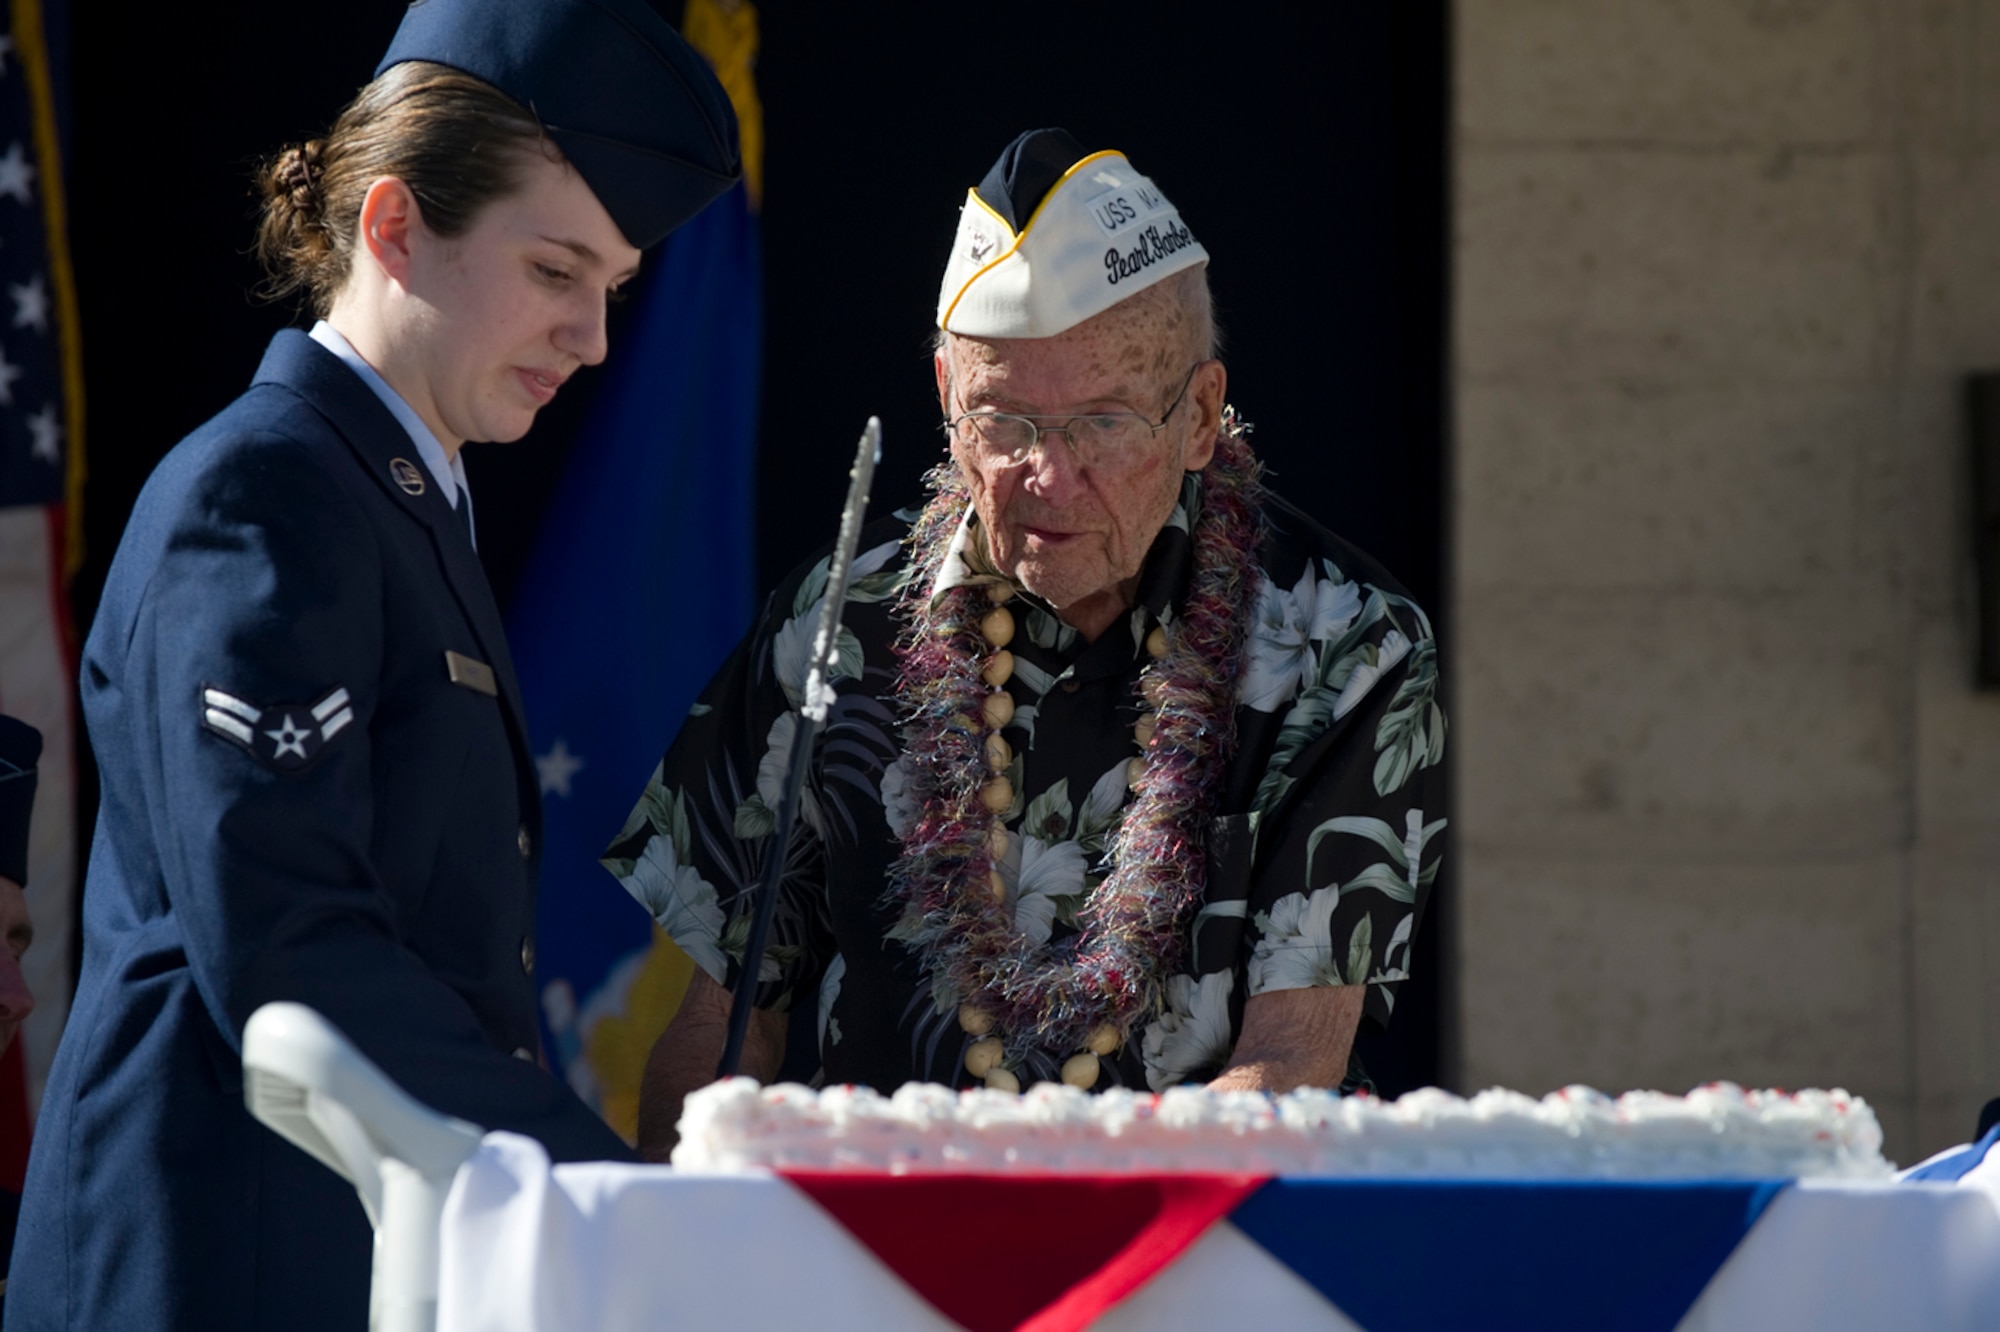 Air Force Technical Applications Center Airman 1st Class Nicole Hart – the most junior servicemember present – and retired U.S. Navy Capt. Jeffrey – the most senior member present – cut the cake with a ceremonial sword during the Pearl Harbor Day Memorial Ceremony Dec. 7 at Patrick Air Force Base. AFTAC paid tribute to Captain Jeffrey and three other U.S. servicemen and several surviving spouses who were all impacted by the 1941 Japanese attacks on Pearl Harbor. (U.S. Air Force photo/Julie Dayringer)